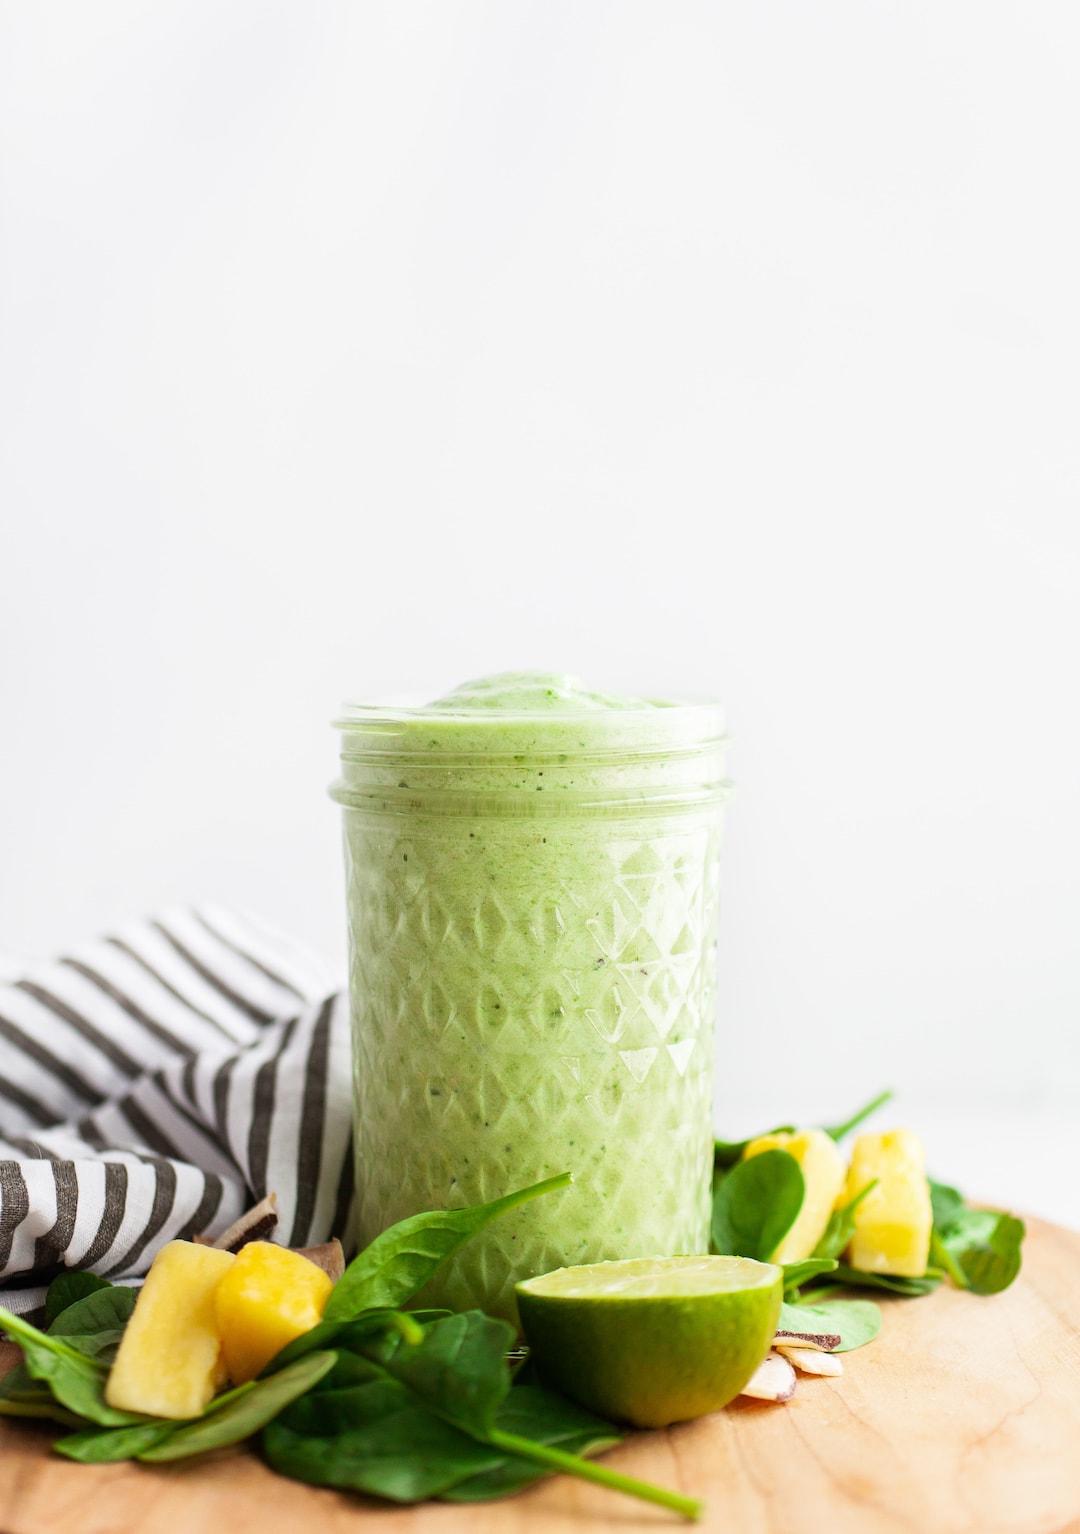 image of a glass jar filled with green smoothie on a wood board with pineapple and spinach on the side